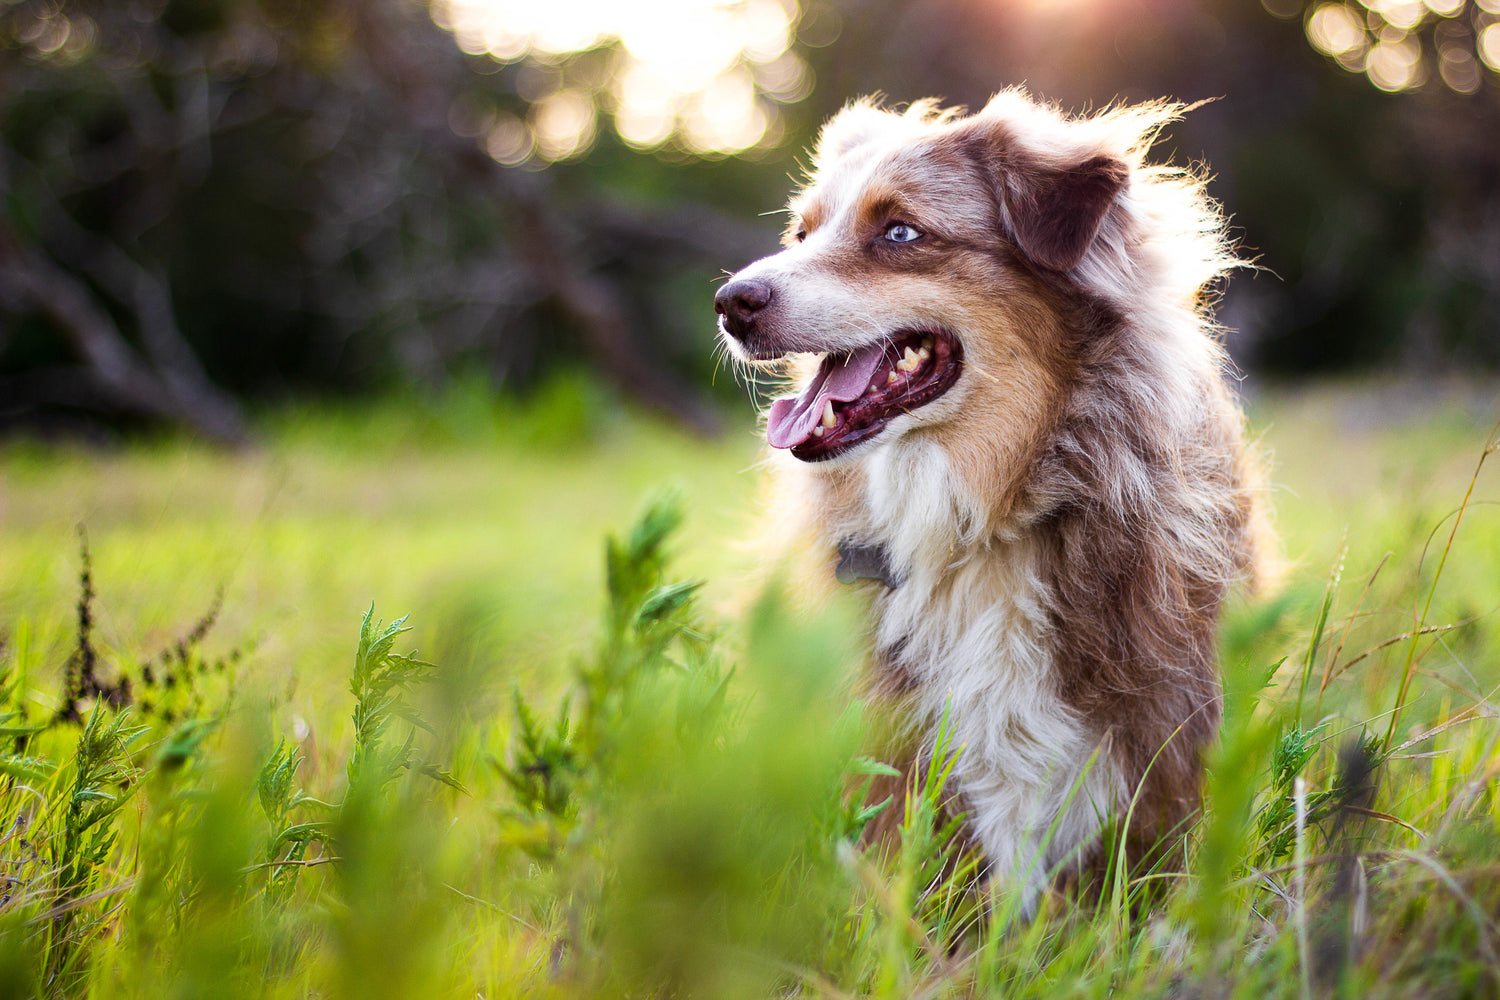 Image alt text: Dog standing in the field and looking to the side